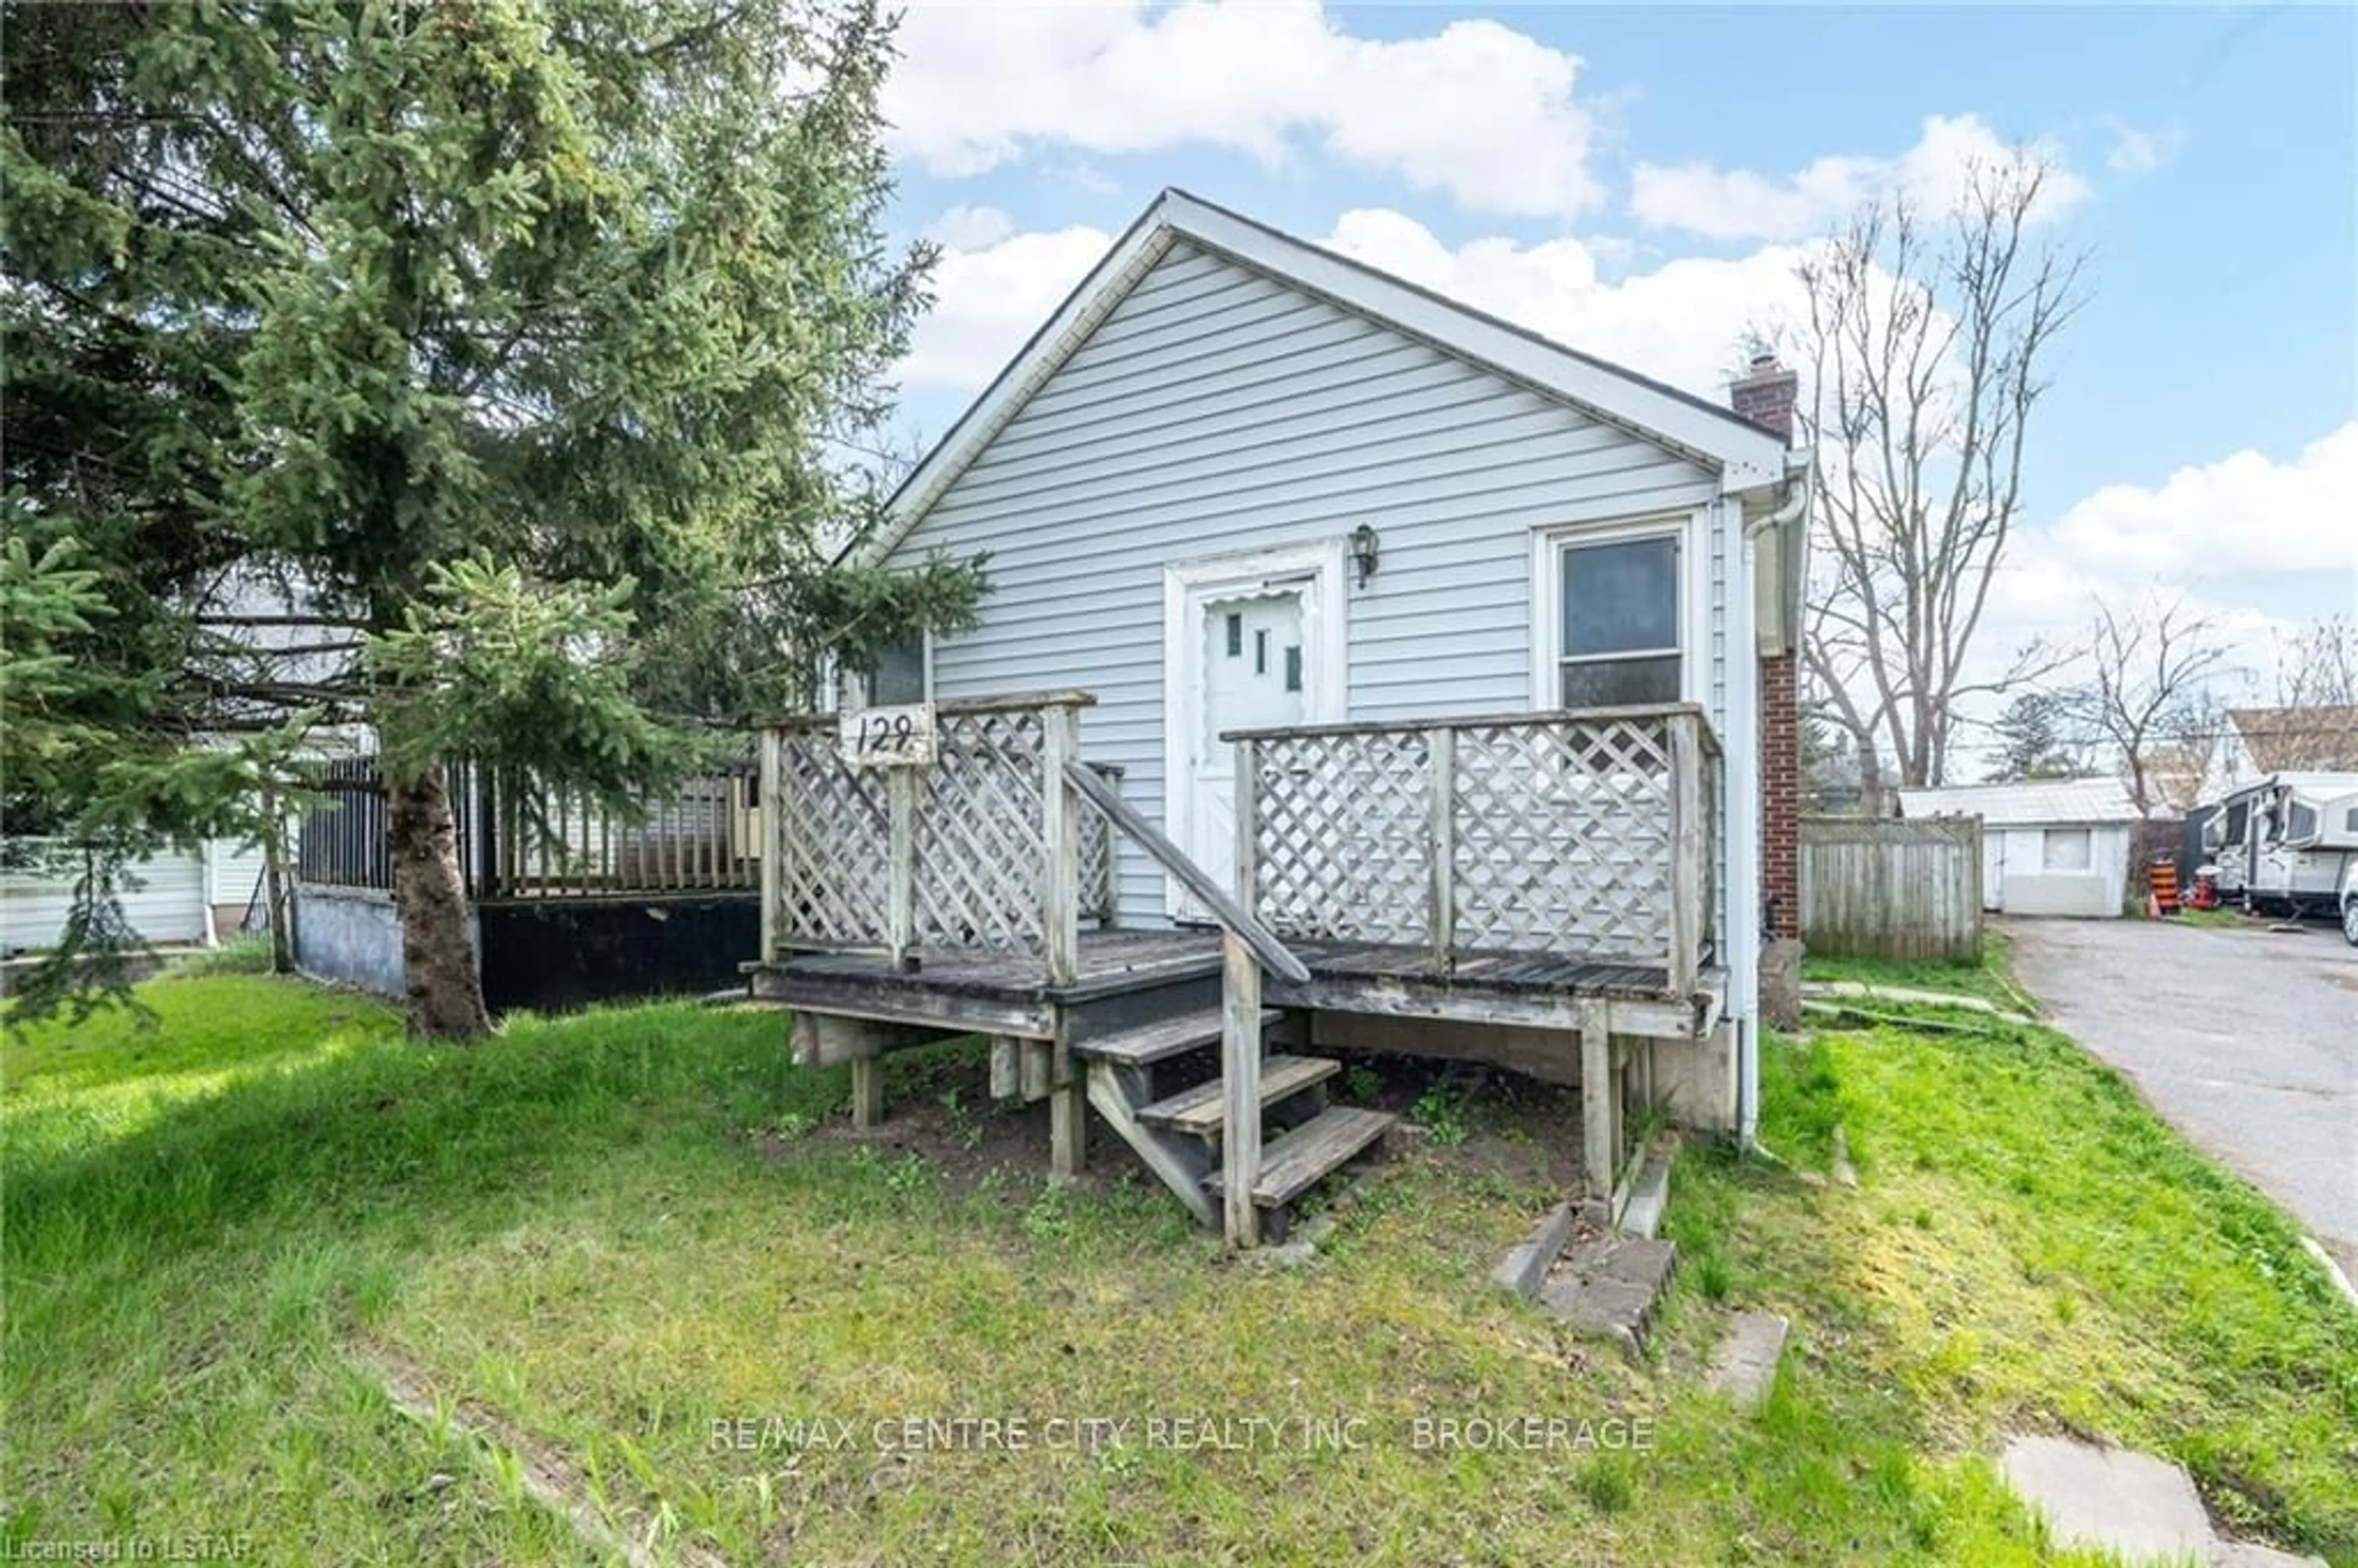 Shed for 129 Highbury Ave, London Ontario N5Z 2W5